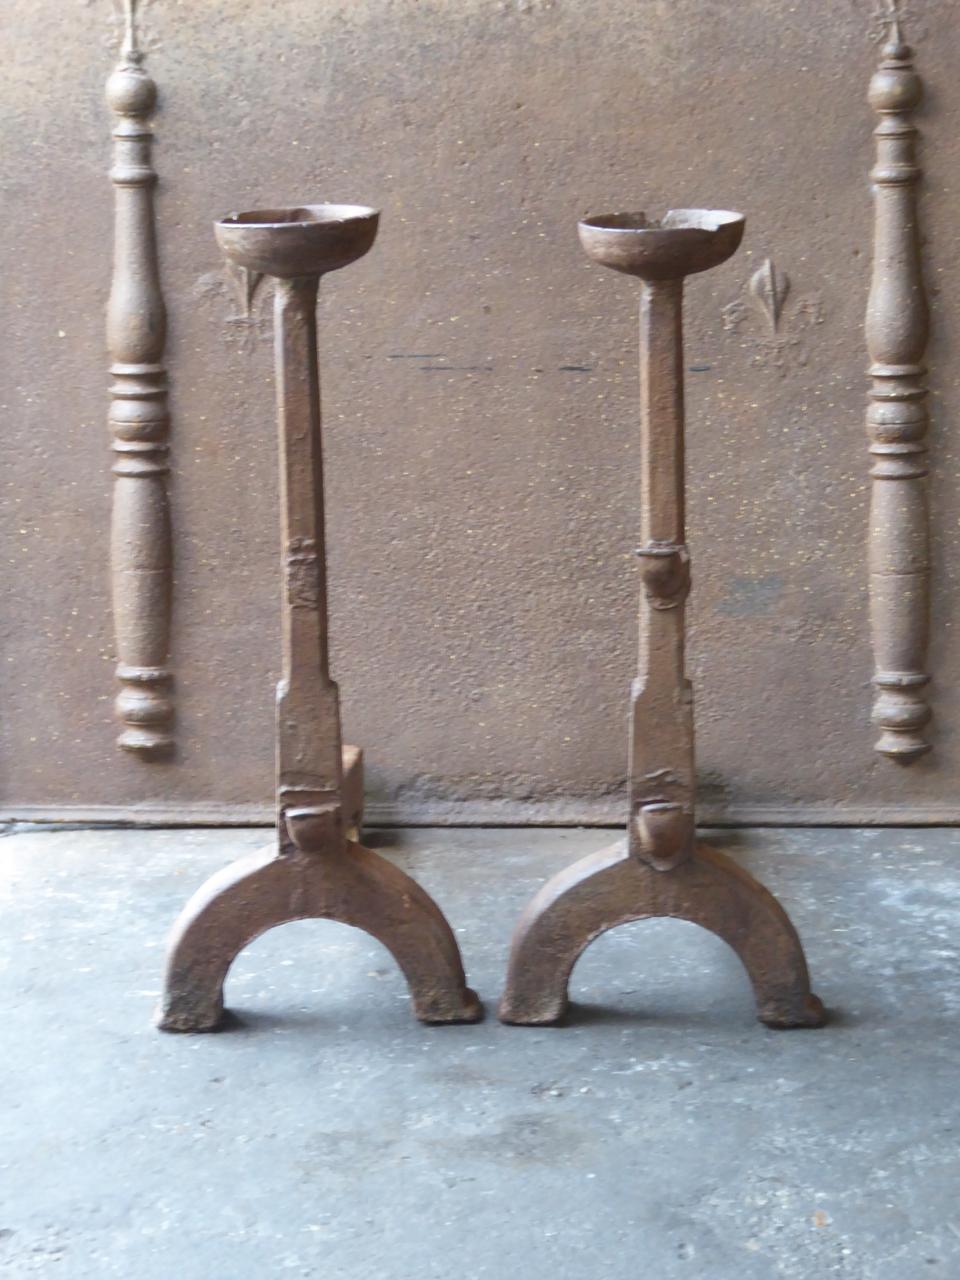 17th century French Gothic andirons made of cast iron. The andirons have spit hooks to grill food and cups to warm drinks. In France this type of very old andirons are called 'landiers'.

This product weighs more than 65 kg / 143 lbs. All our